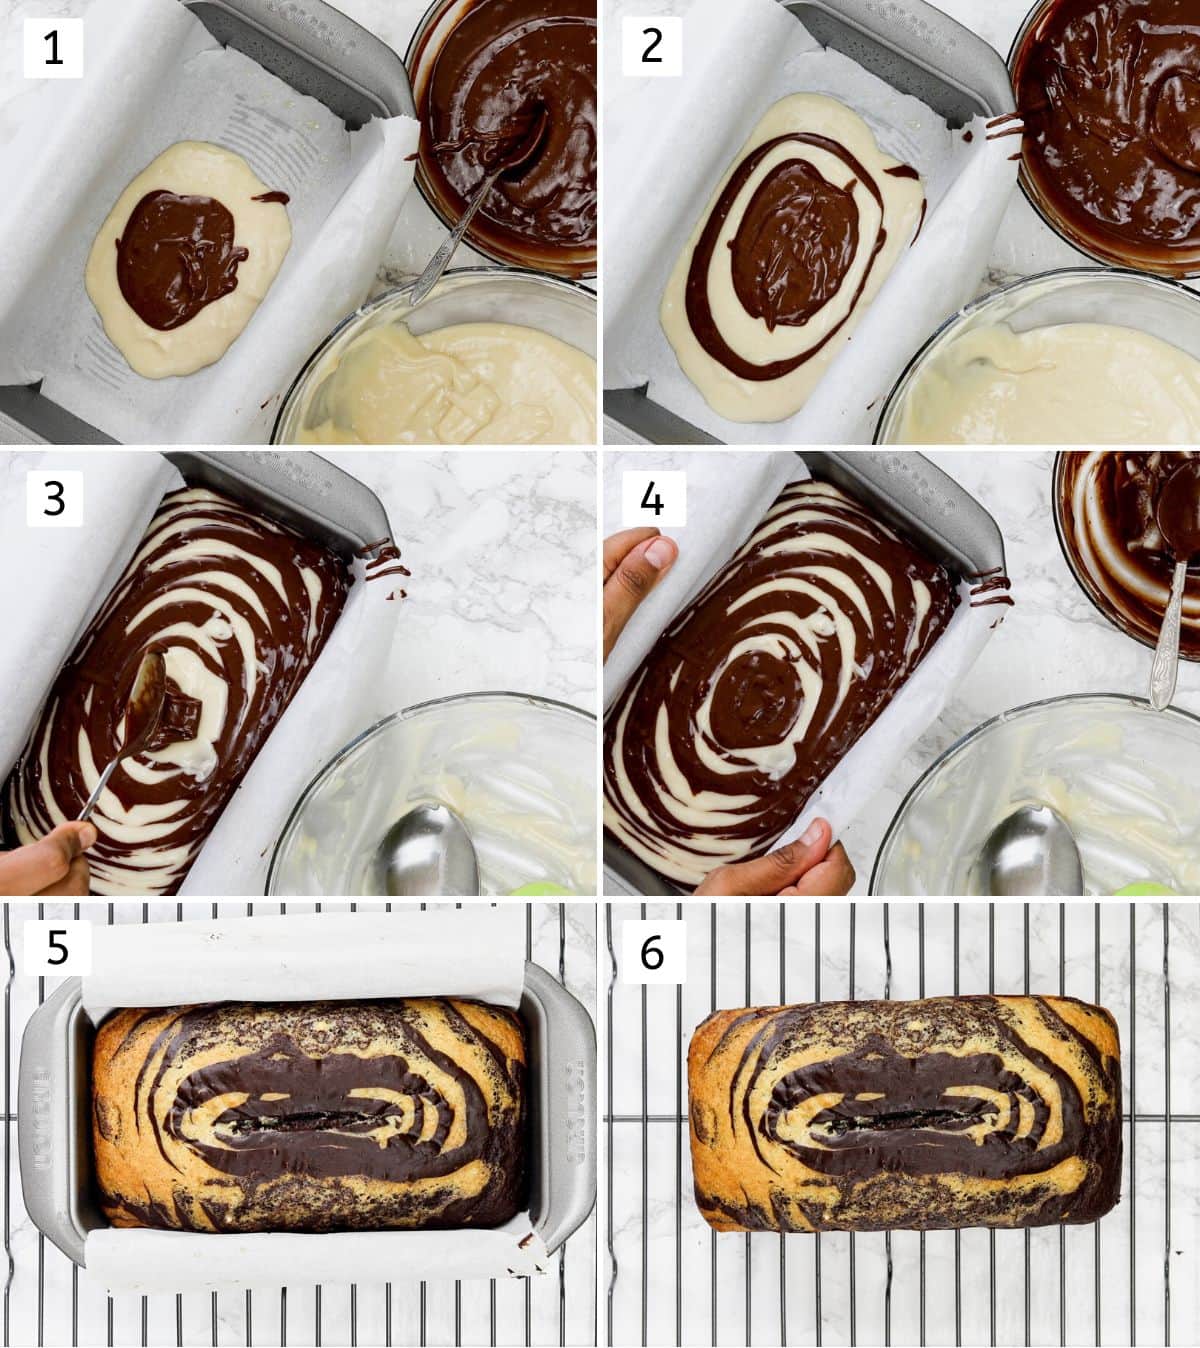 Collage of 6 images showing layering the marble cake in a loaf tin and baked cake.